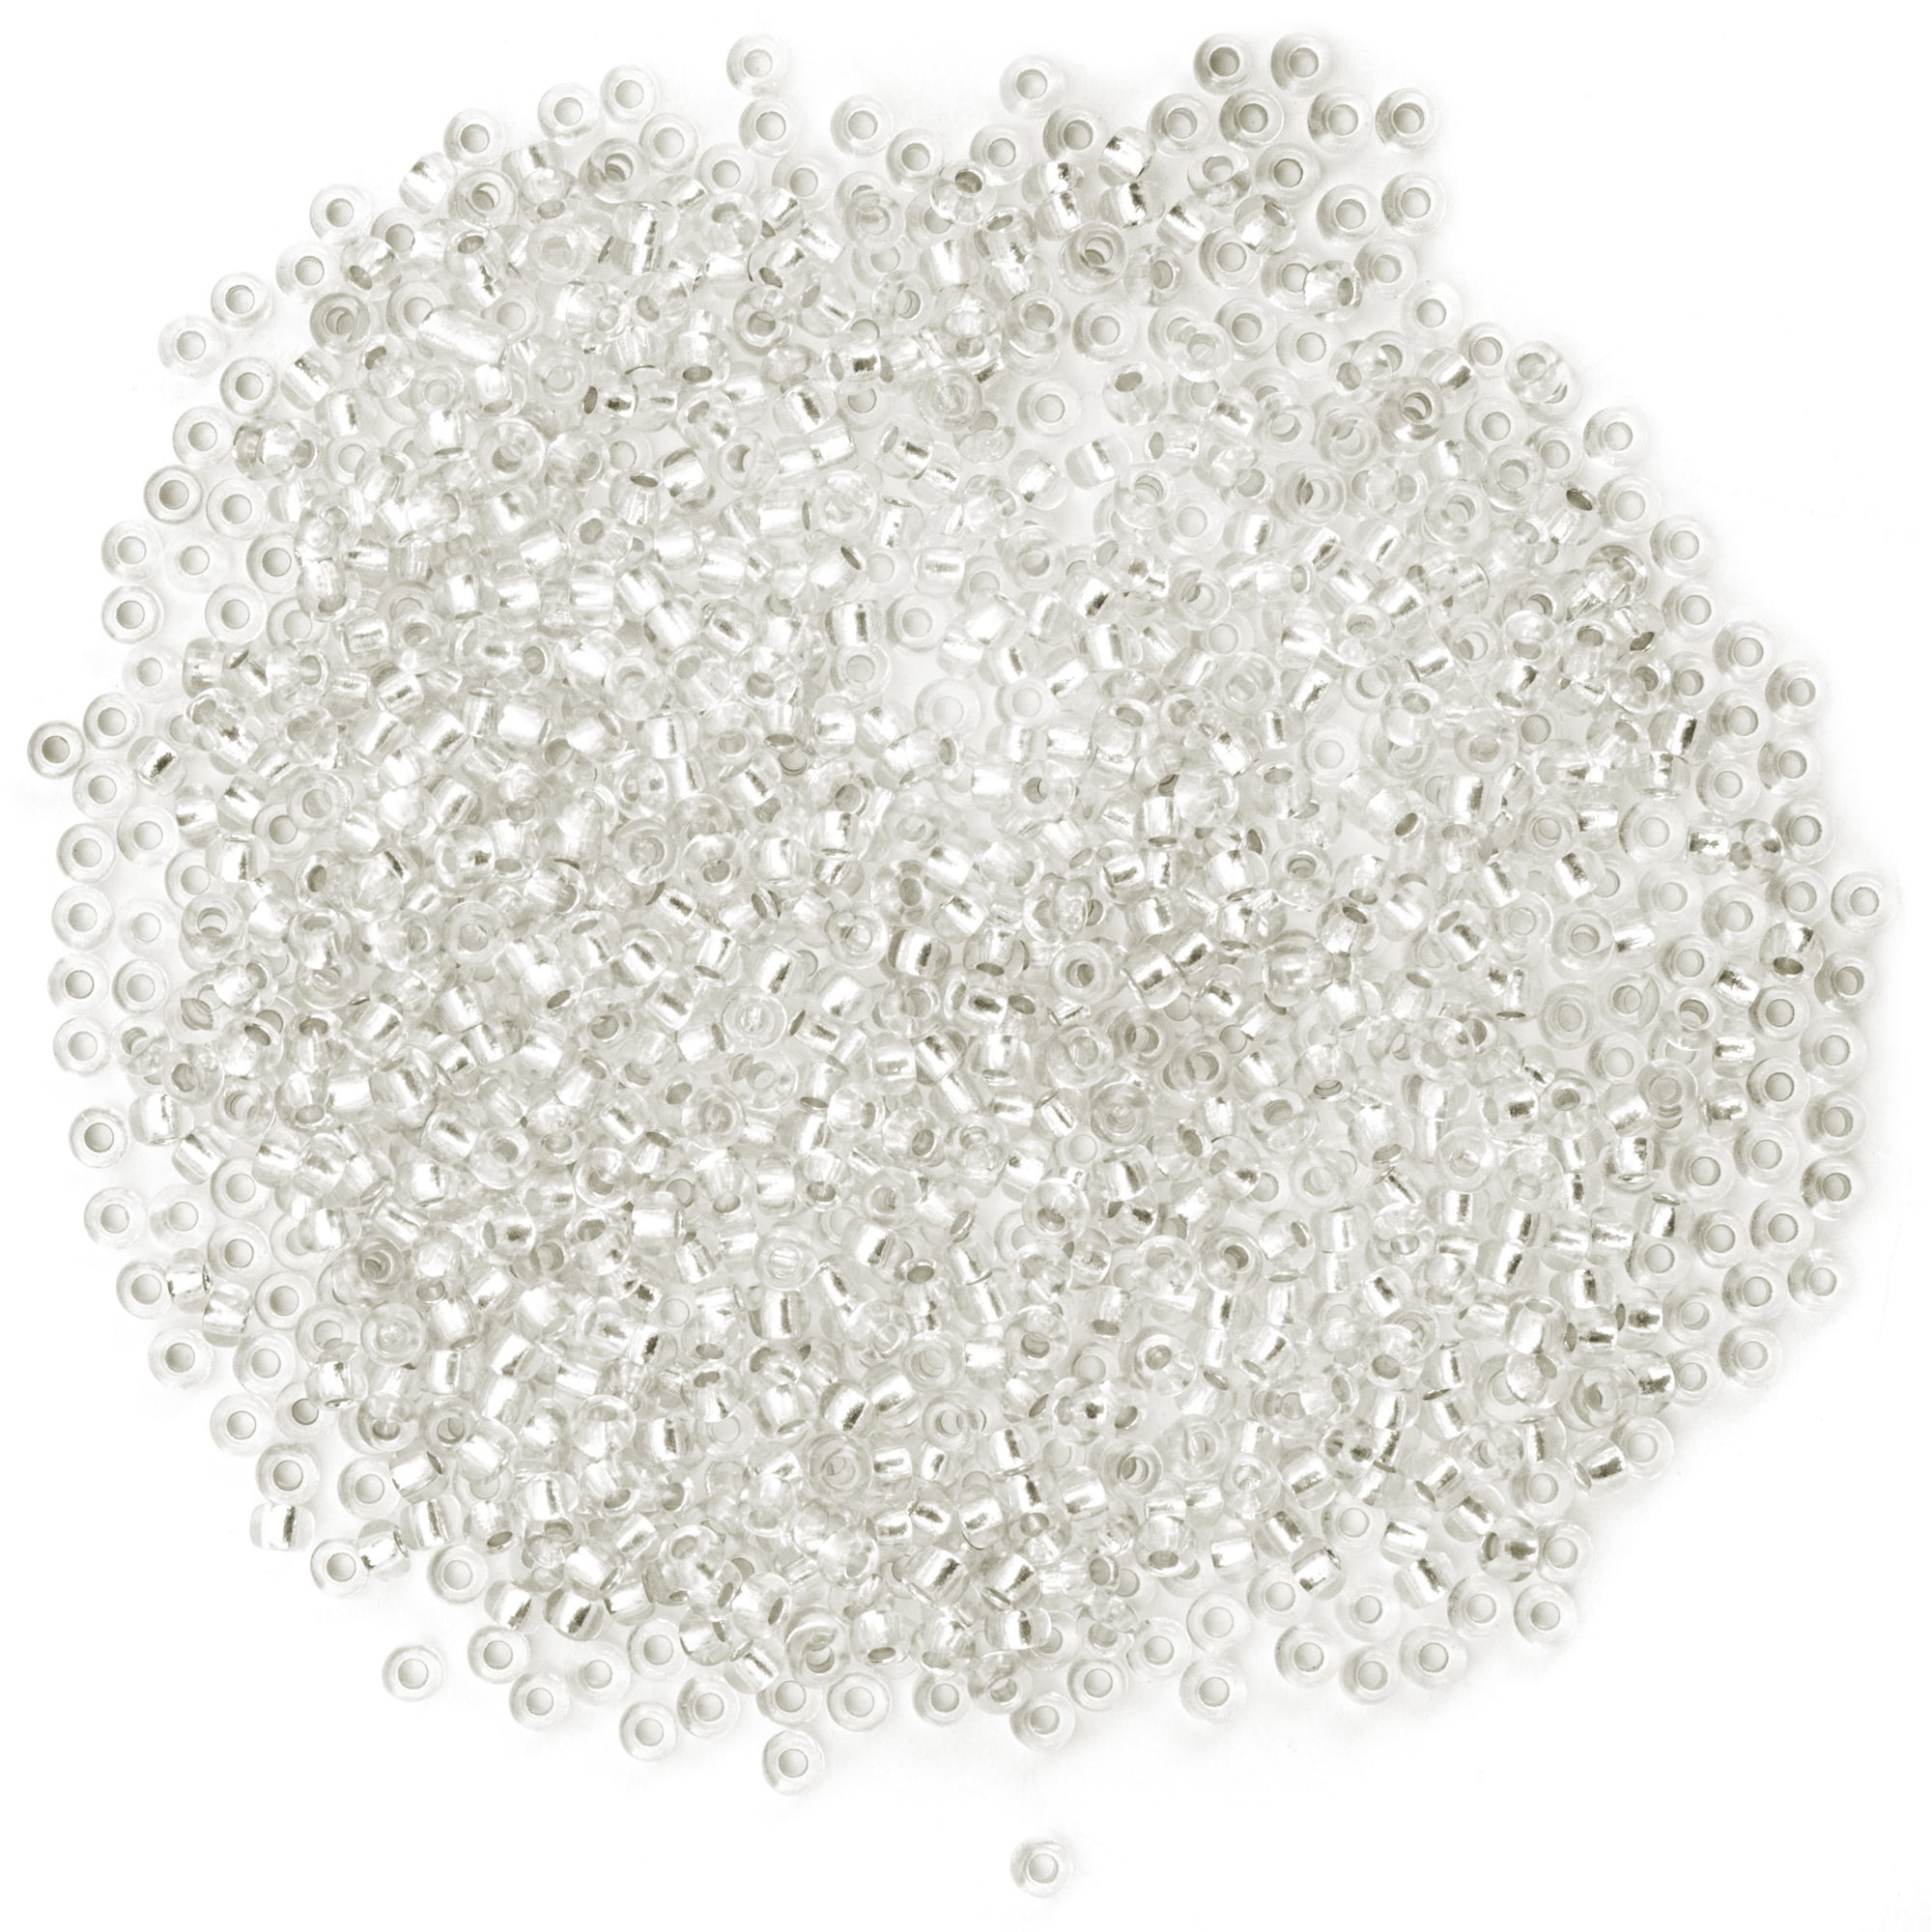 Buy 3mm White Pearl Finish Glass Beads Online. COD. Low Prices. Premium  Quality. Free Shipping